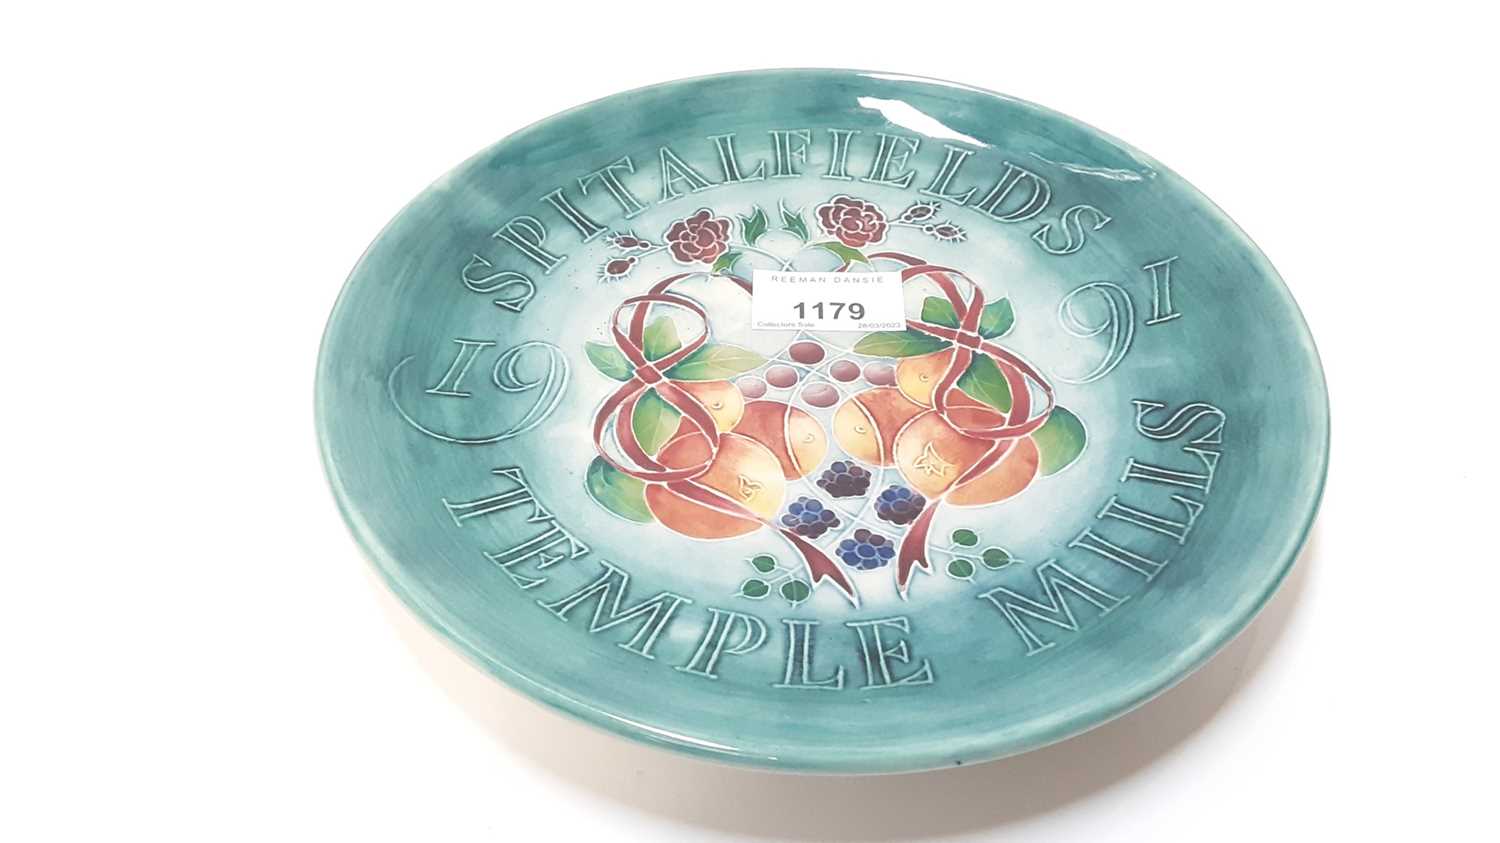 Lot 1179 - Moorcroft pottery Spitalfields Temple Mills plate 1991, decorated with fruit, 22cm diameter